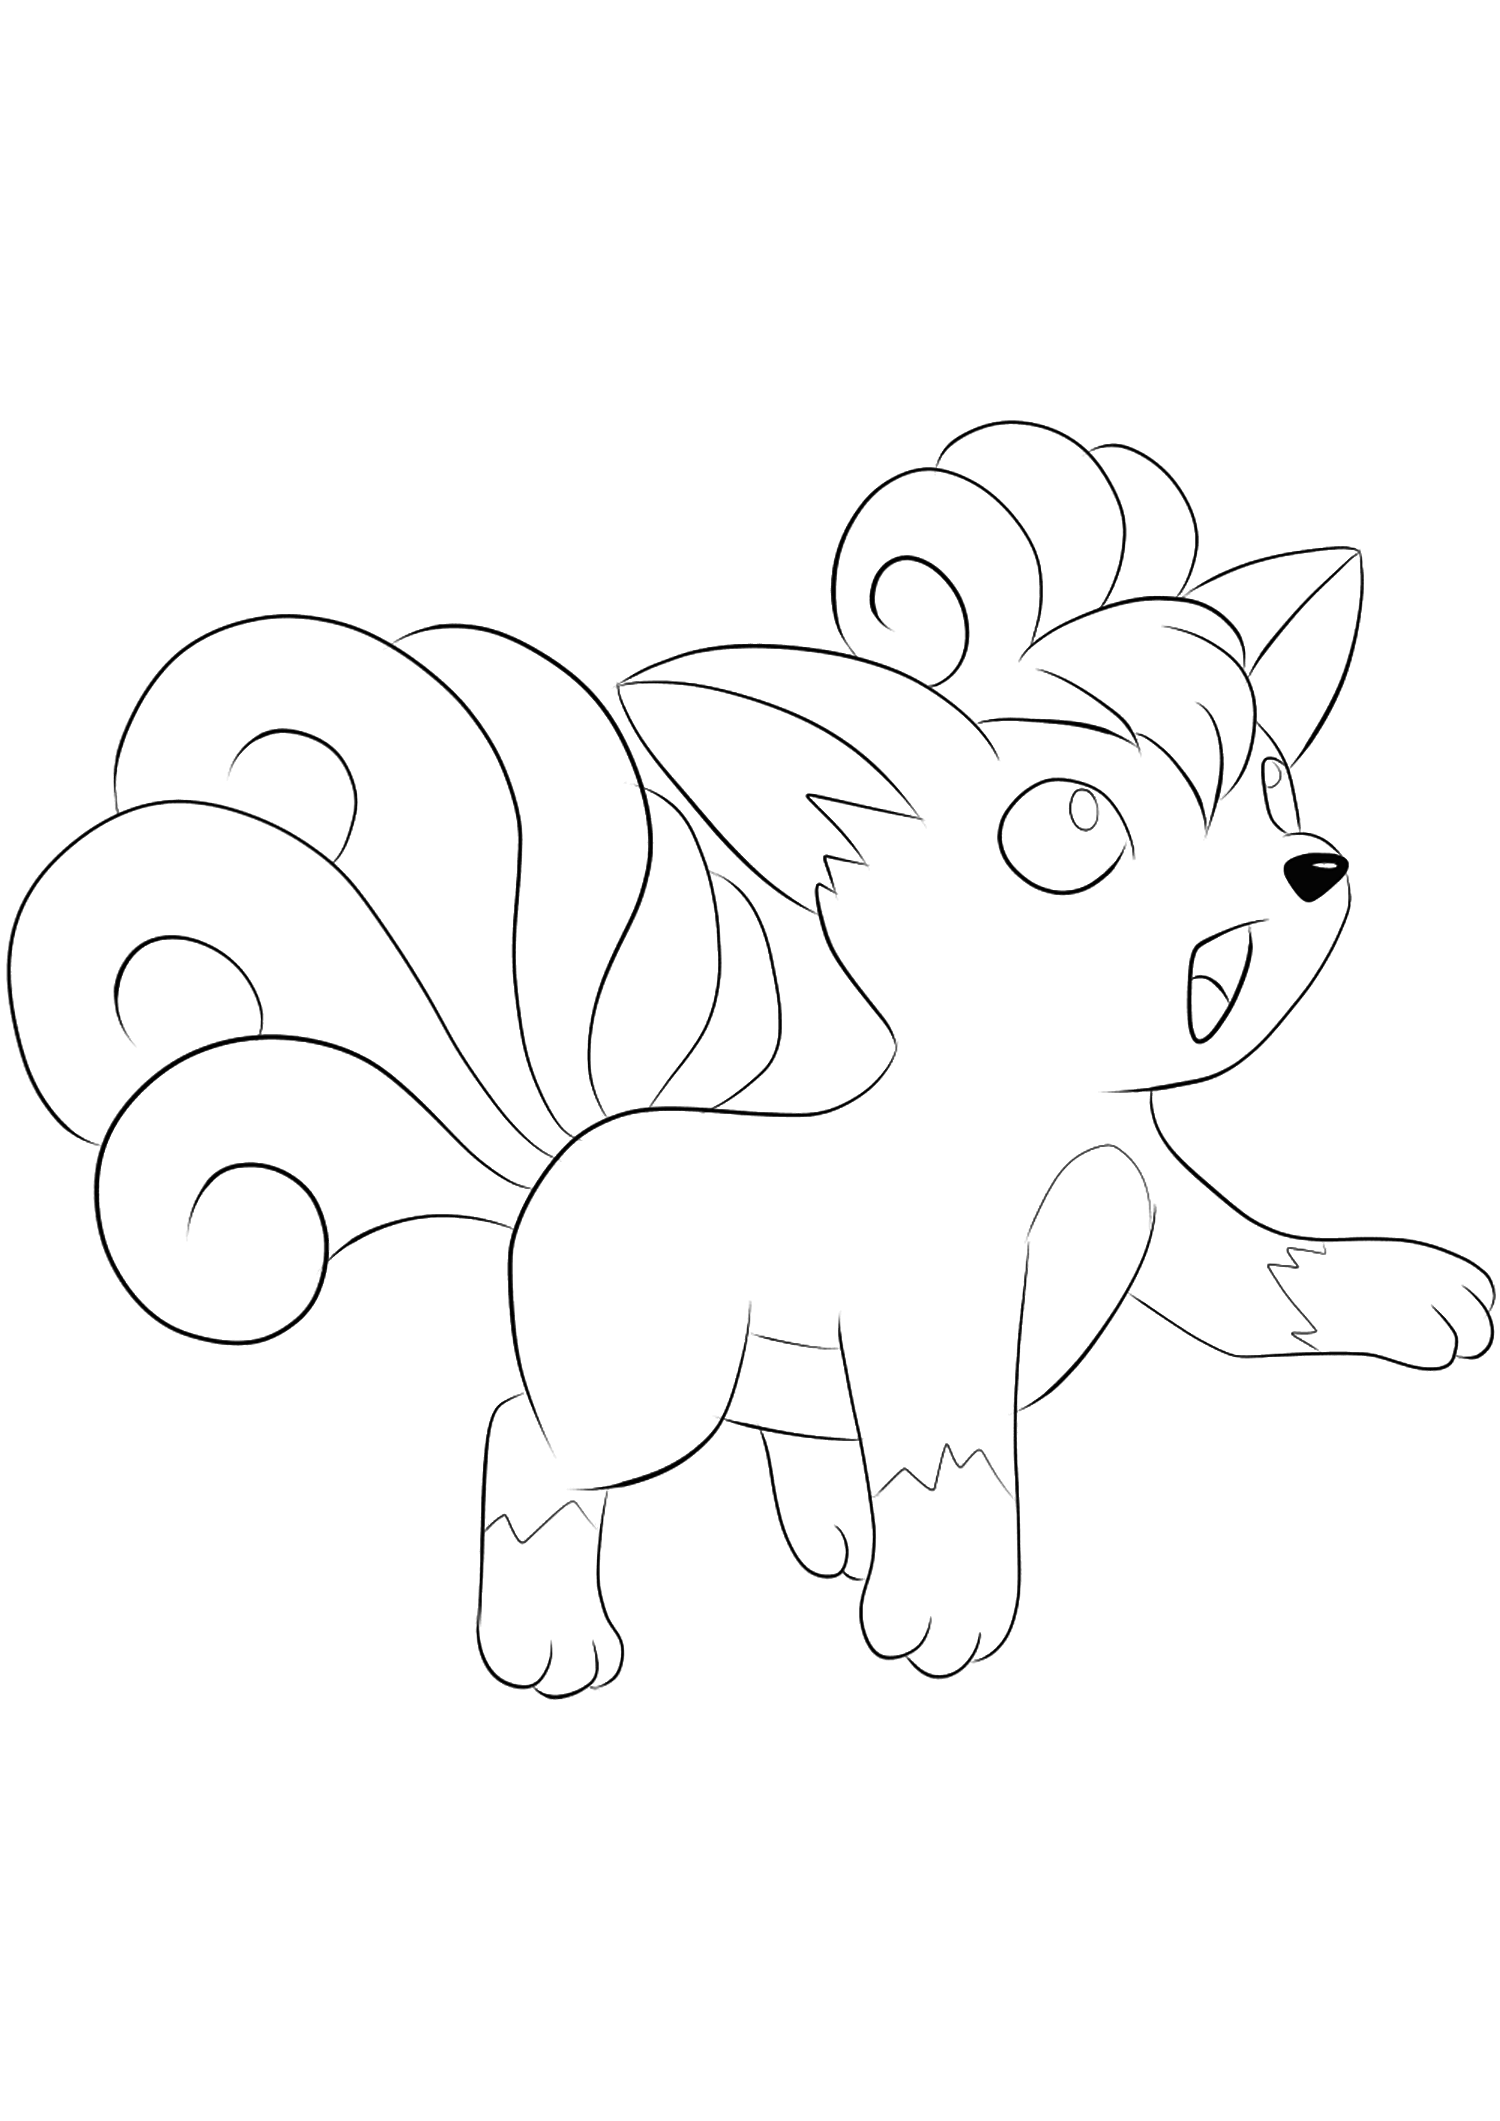 Supercoloring Vulpix - Generation I Pokemon Coloring Pages ...